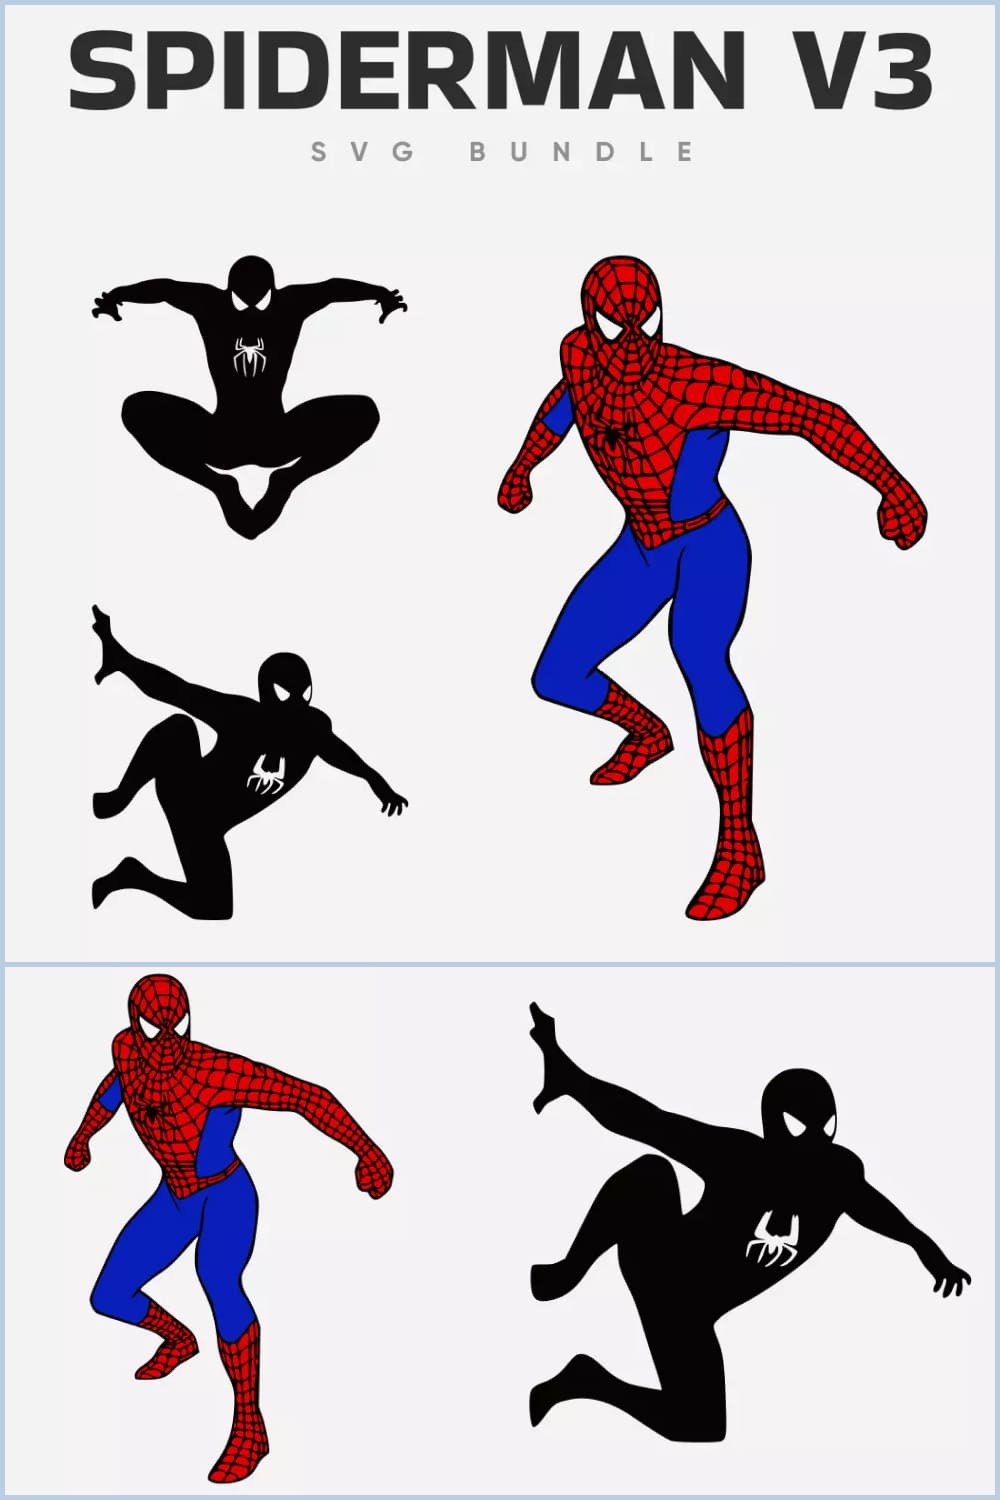 Spiderman images in black and fully colored.